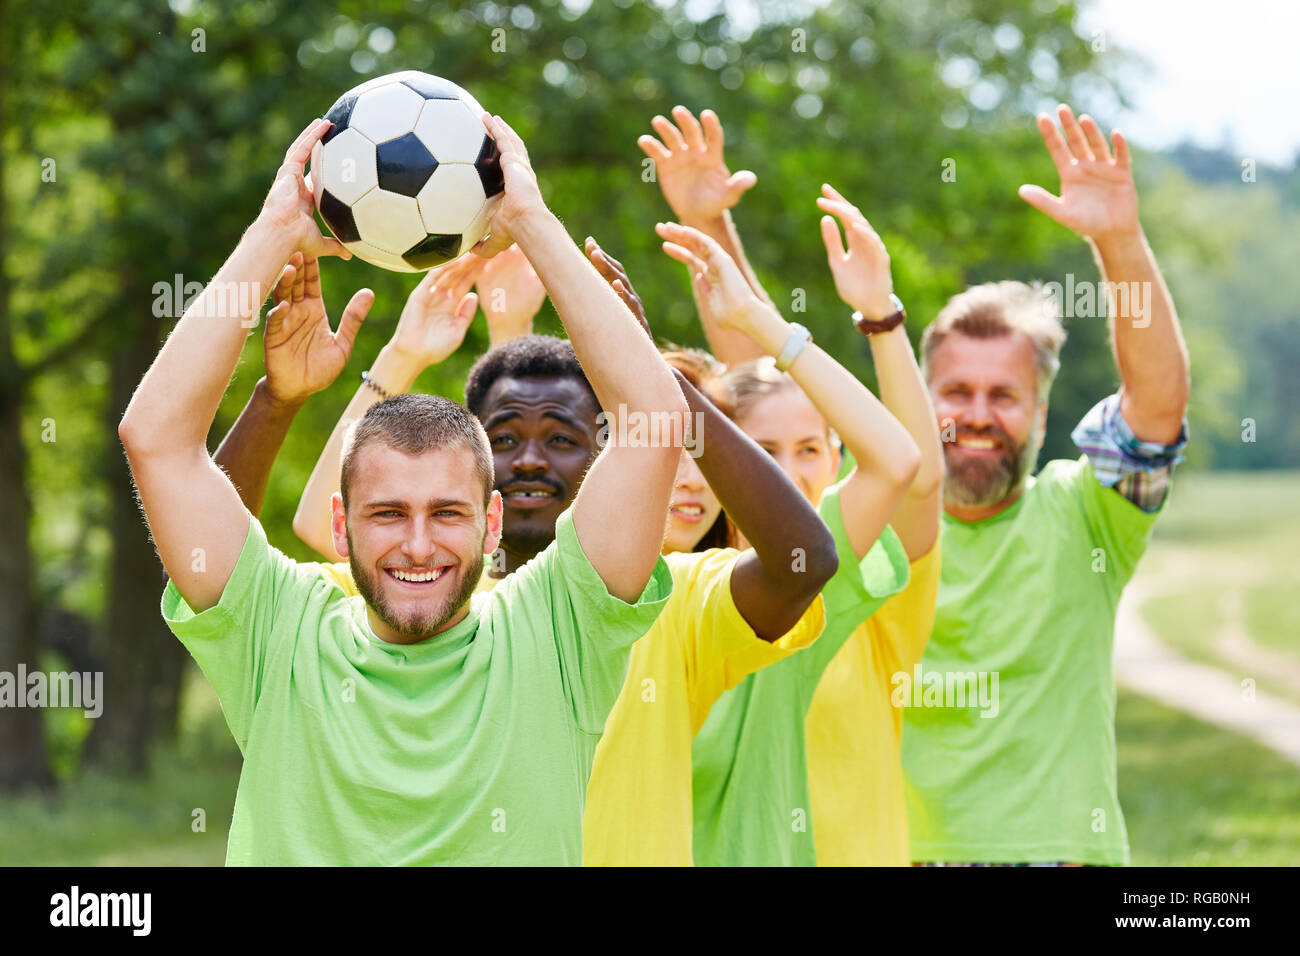 Group as a team plays with football at a teambuilding event Stock Photo